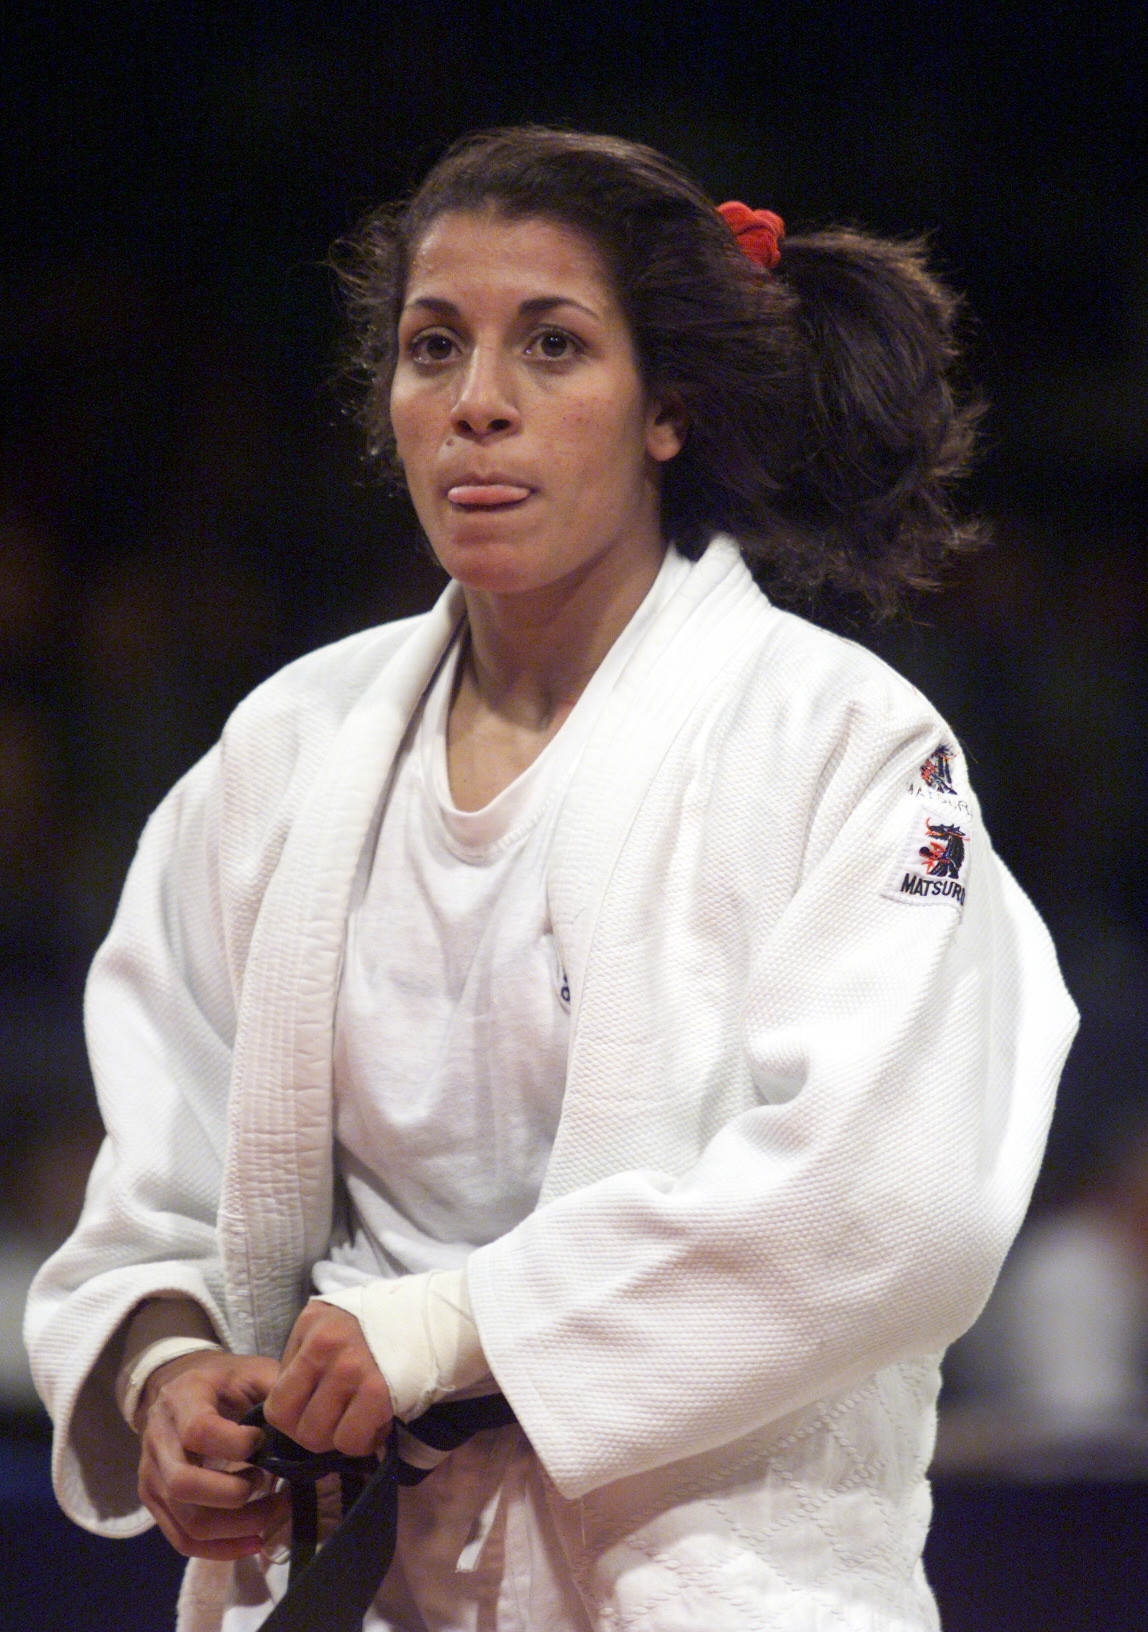 Salima Souakri became the first Algerian and Arab woman to compete in judo at the Olympics after competing at Atlanta 1996 ©Getty Images